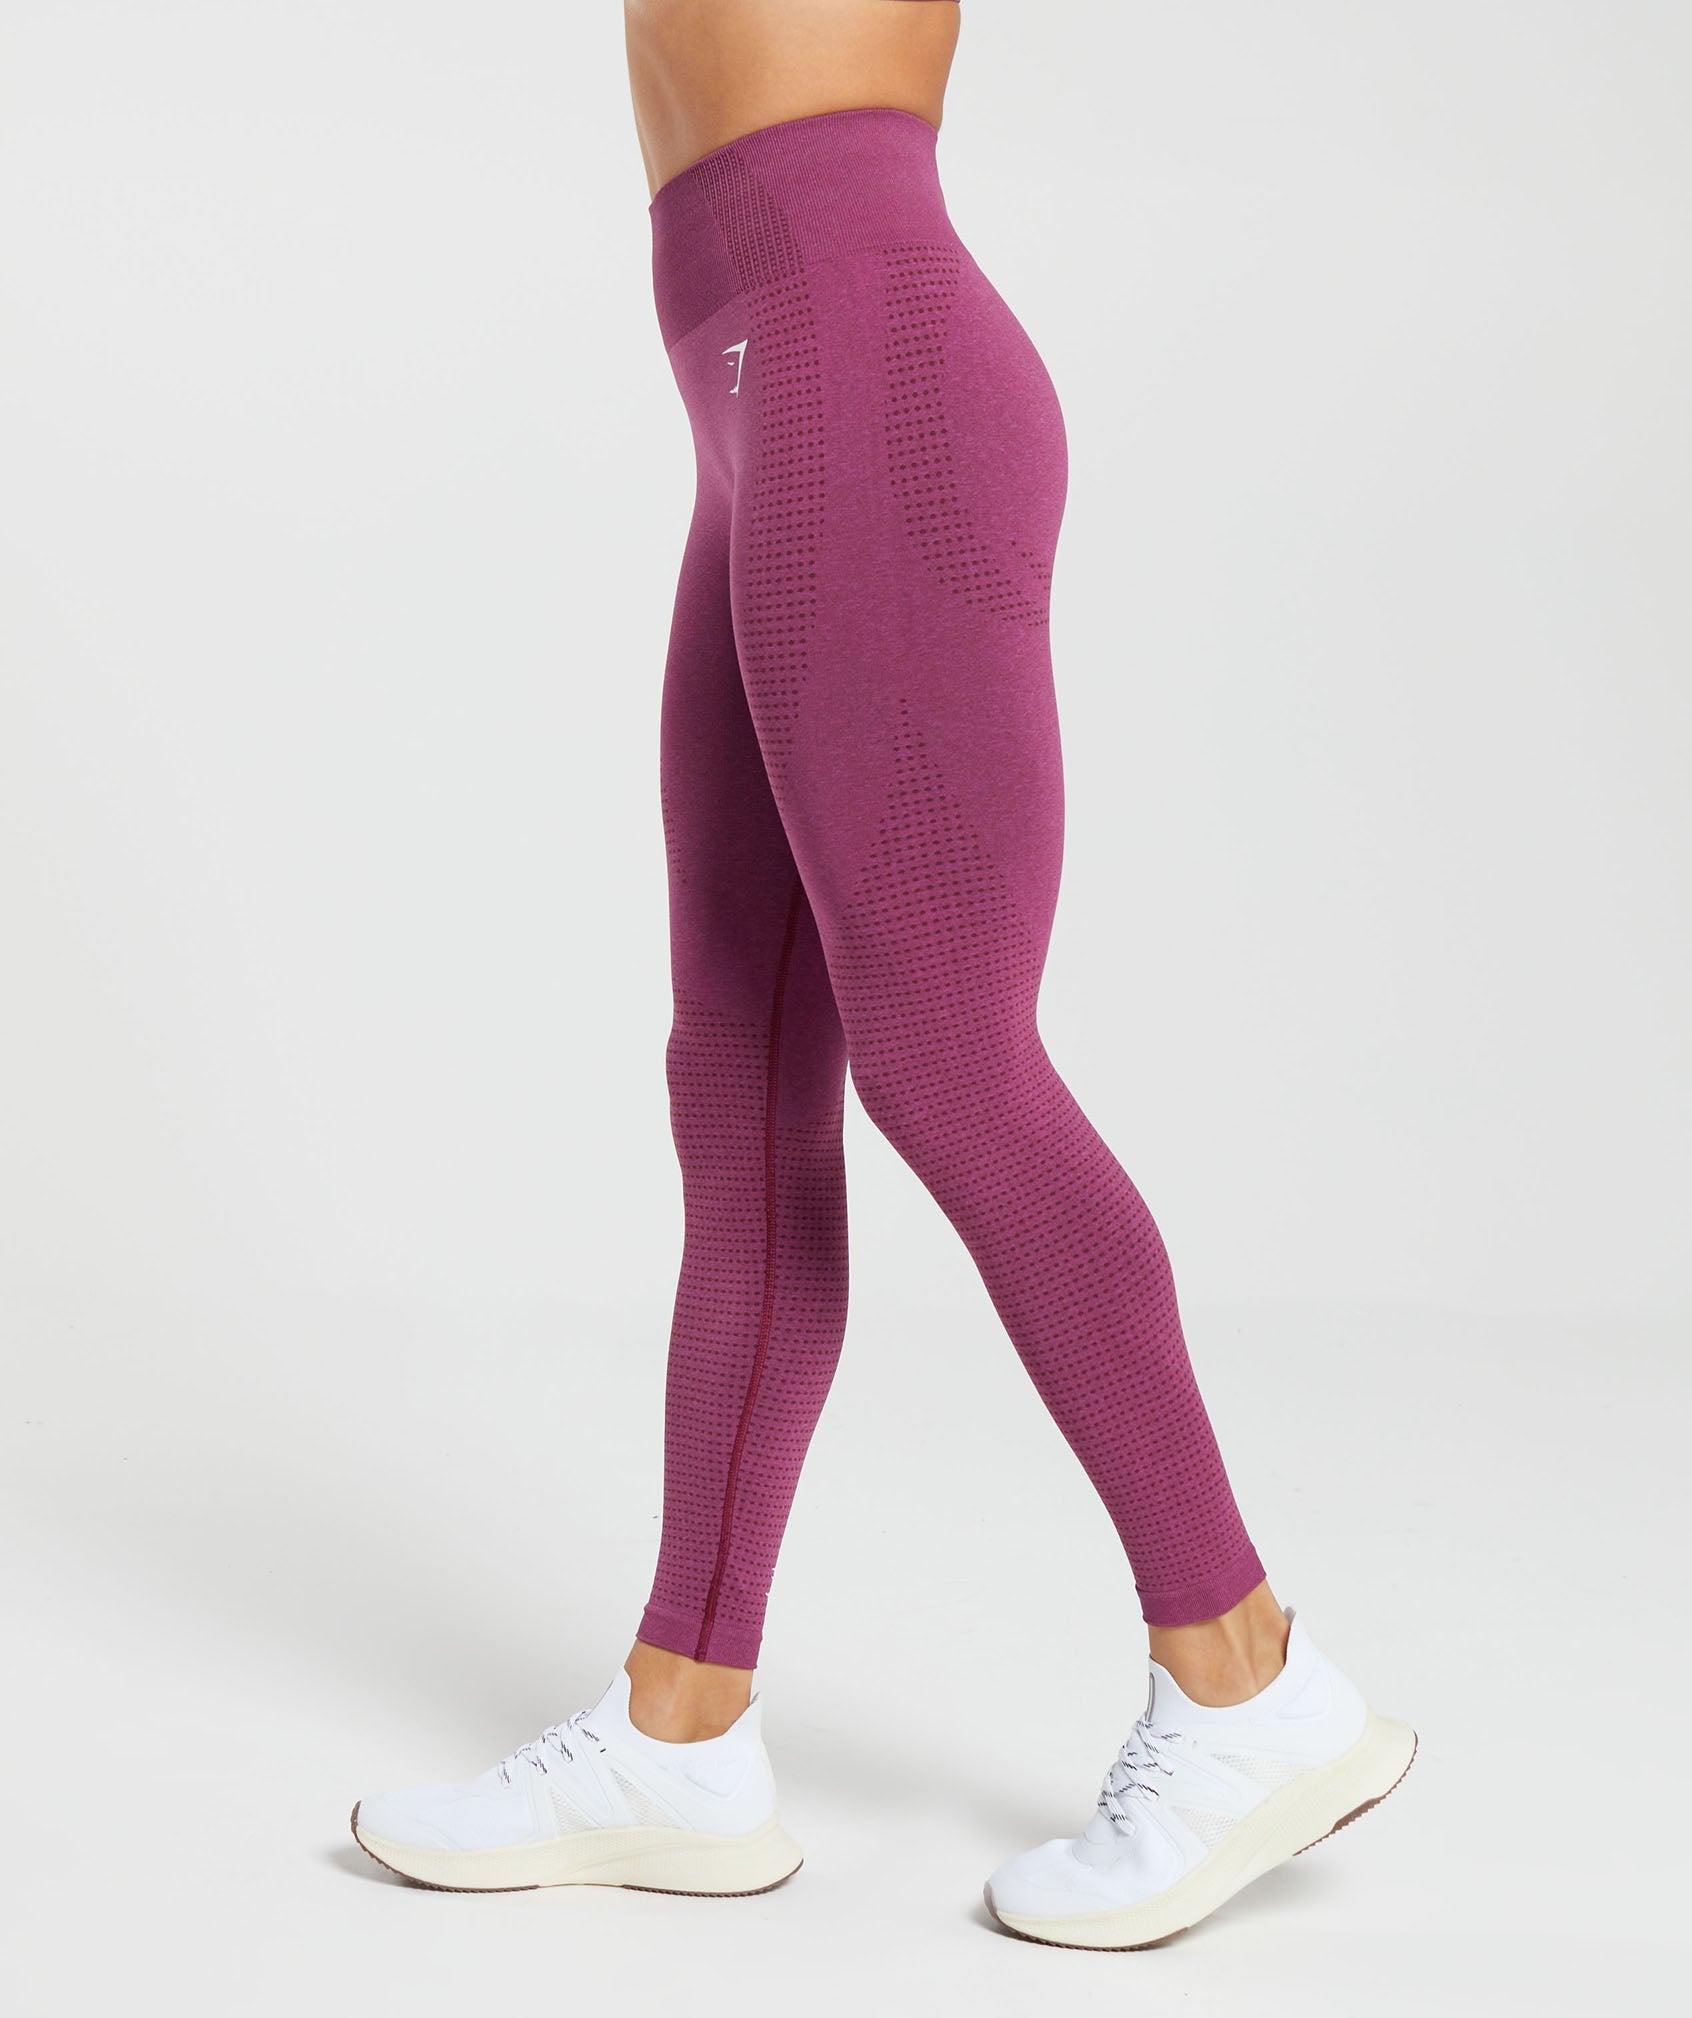 Gymshark Dreamy Leggings With Pockets Dusty Pink Purple Taupe Size